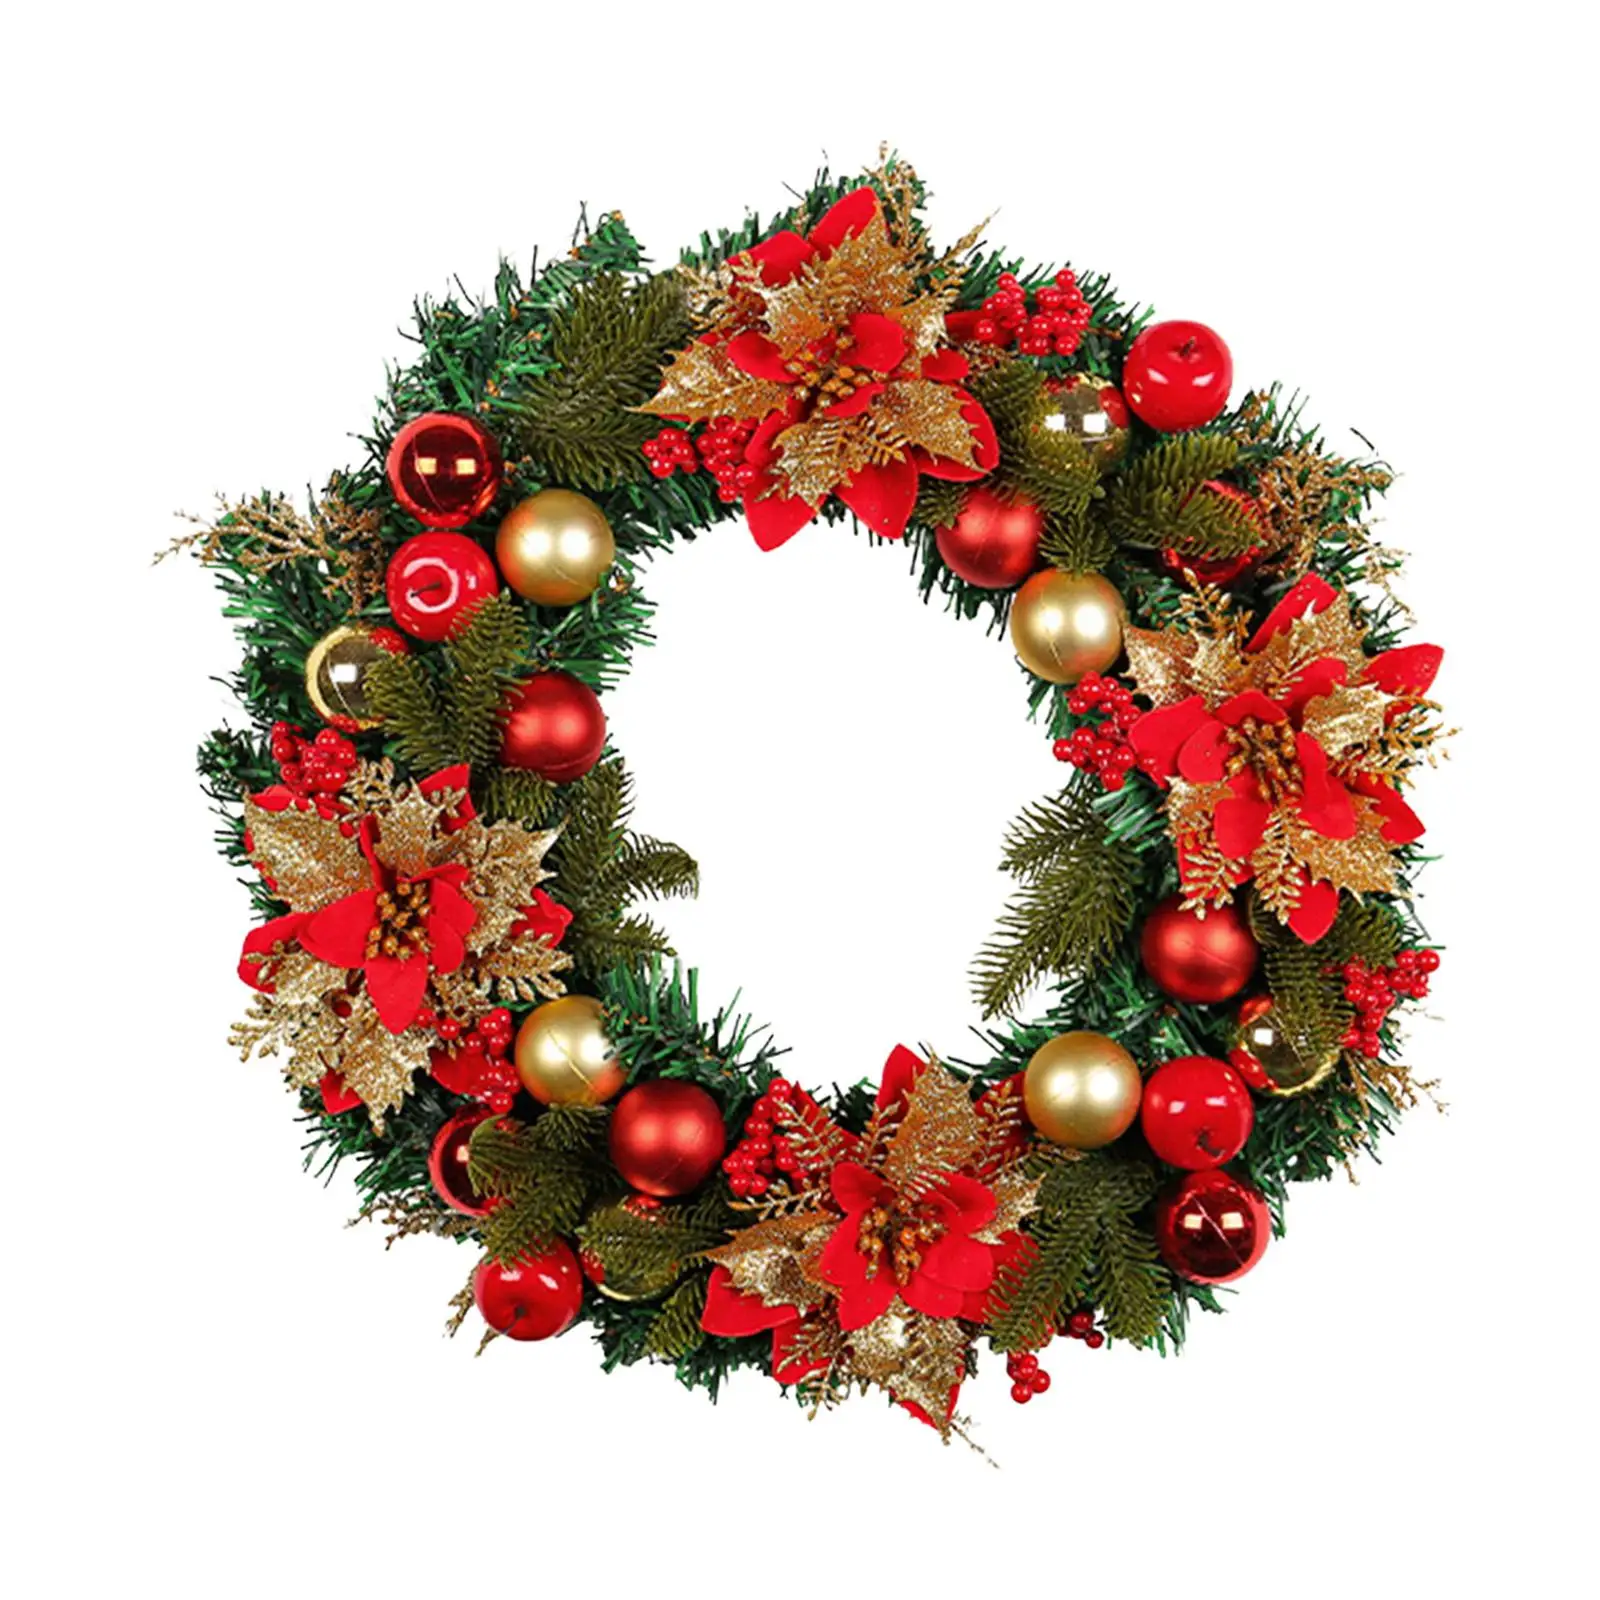 Christmas Wreath Decorations Greenery Wall Christmas Ball Ornaments Artificial for Indoor Outdoor Window Festival Party